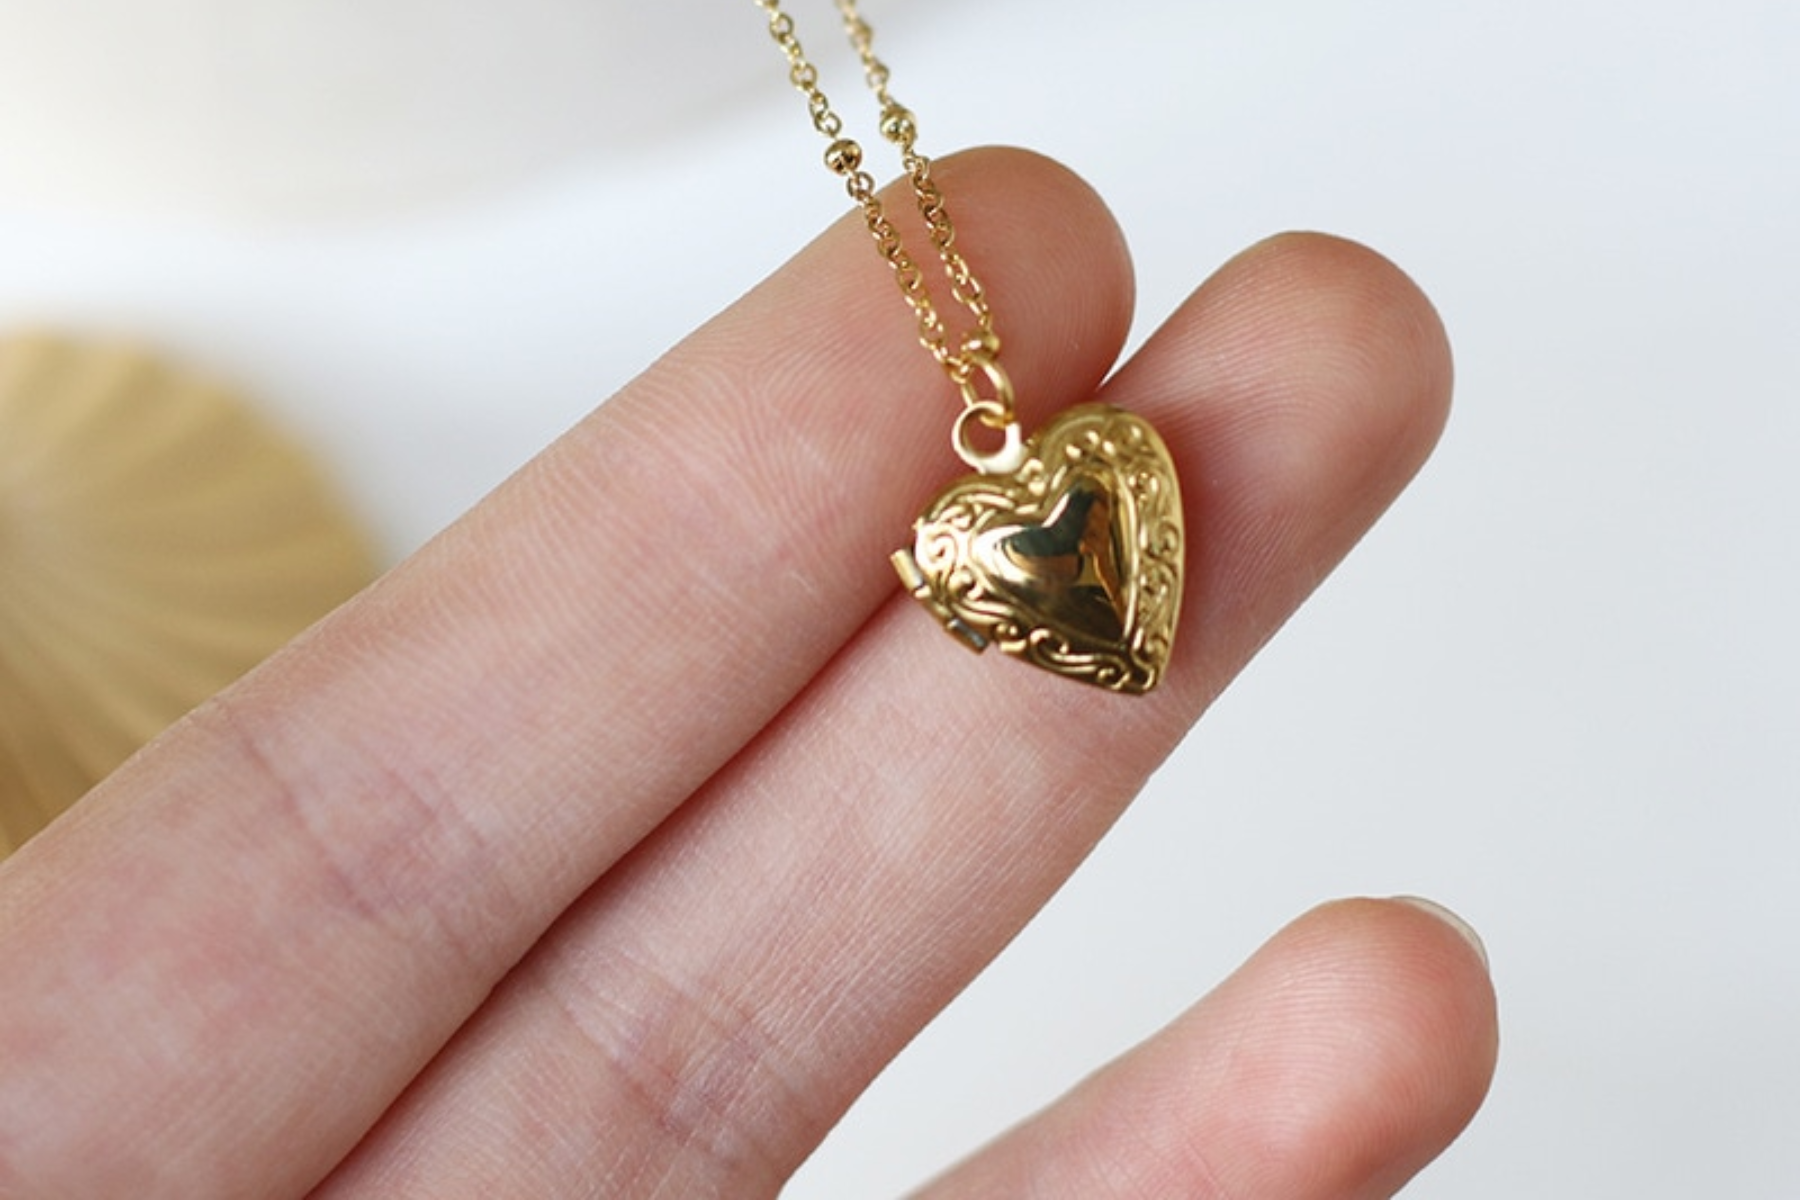 A woman's hand holding a gold heart-shaped pendant necklace